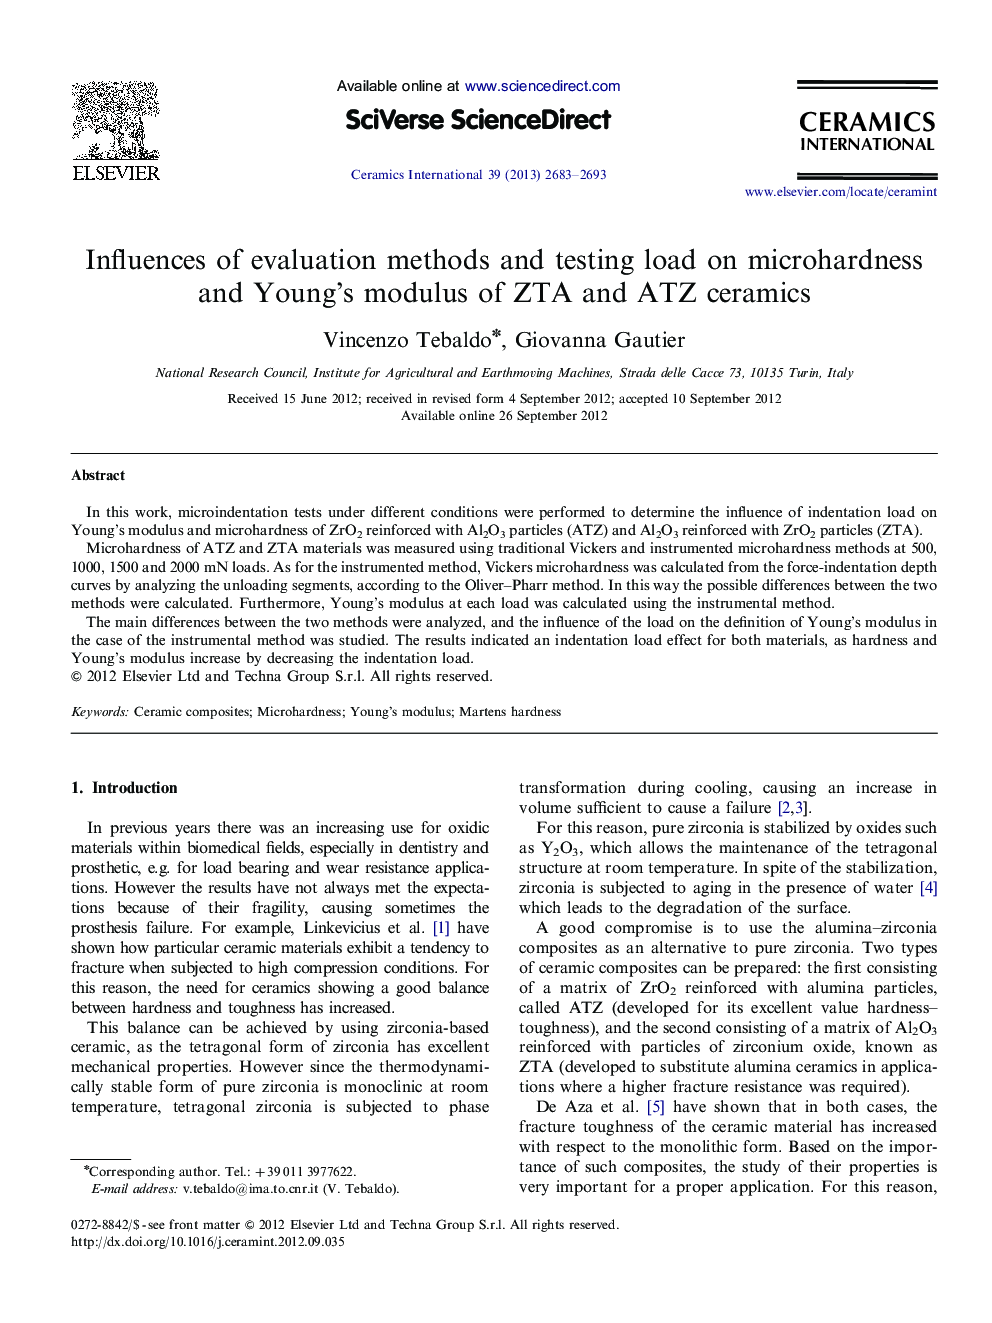 Influences of evaluation methods and testing load on microhardness and Young's modulus of ZTA and ATZ ceramics